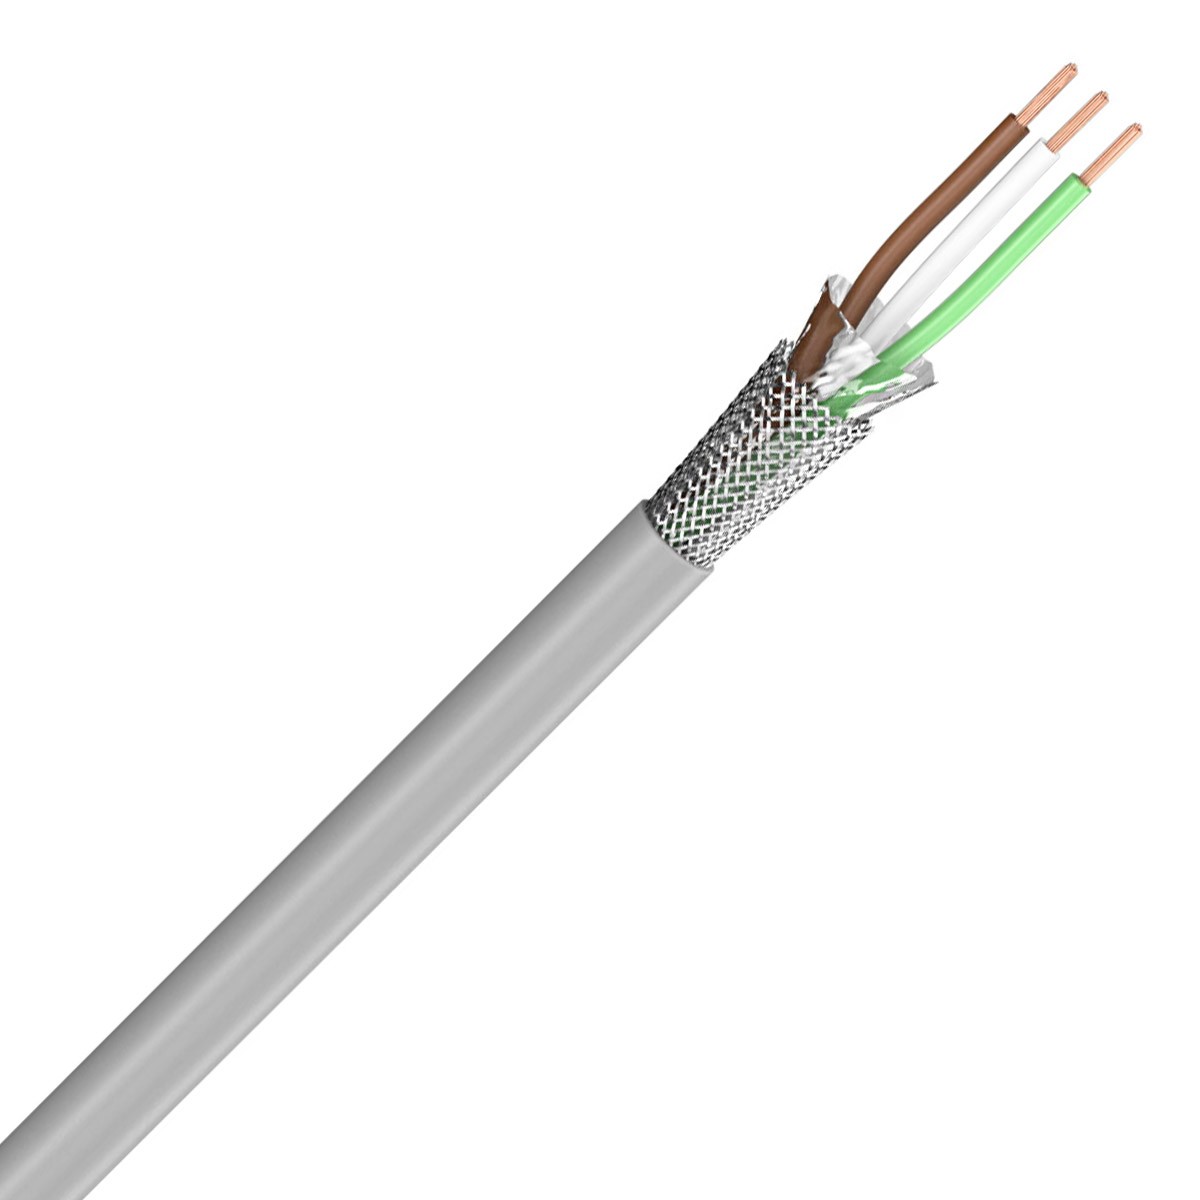 SOMMERCABLE CONTROL FLEX Multiconductor Cable 3x0.25mm² Ø 4.4mm